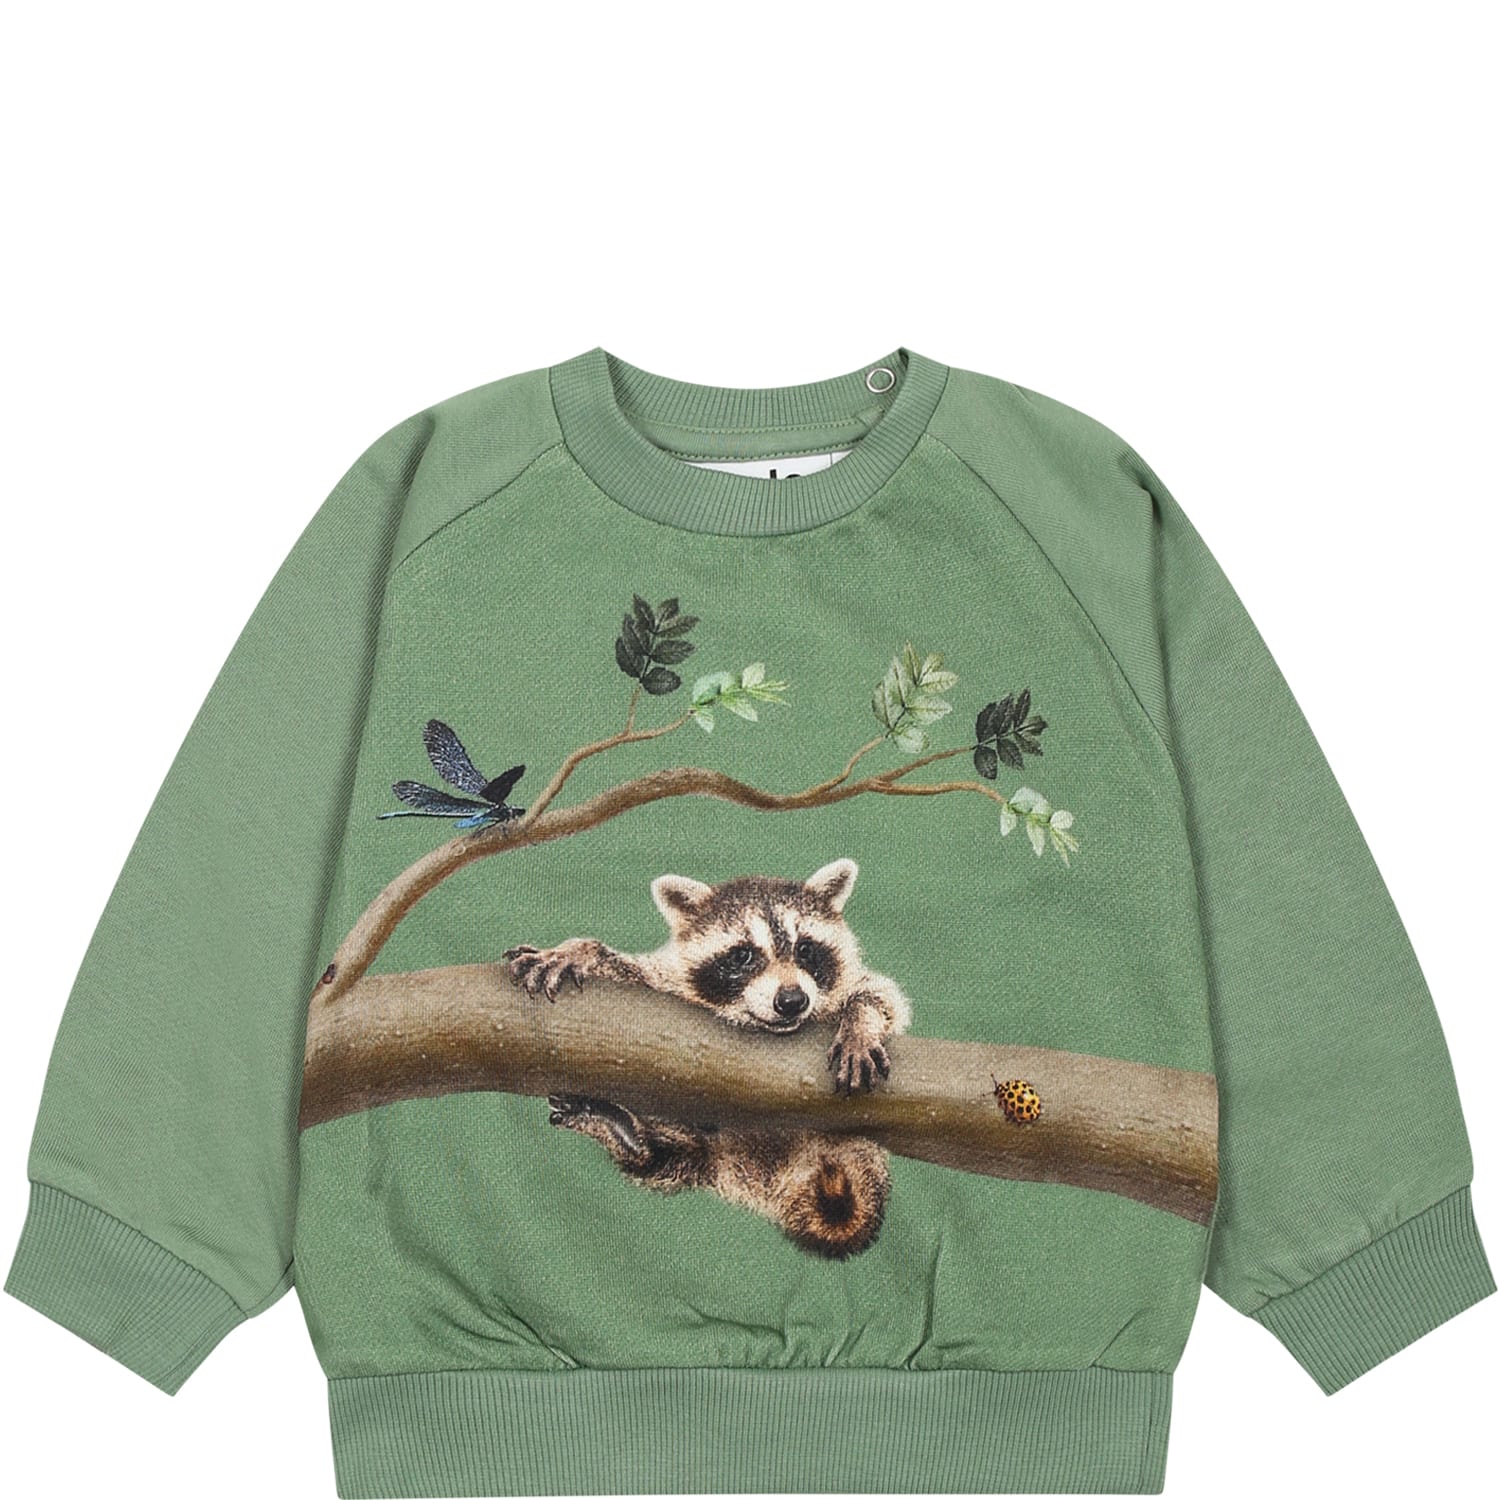 MOLO GREEN SWEATSHIRT FOR BABY KIDS WITH ANIMALS